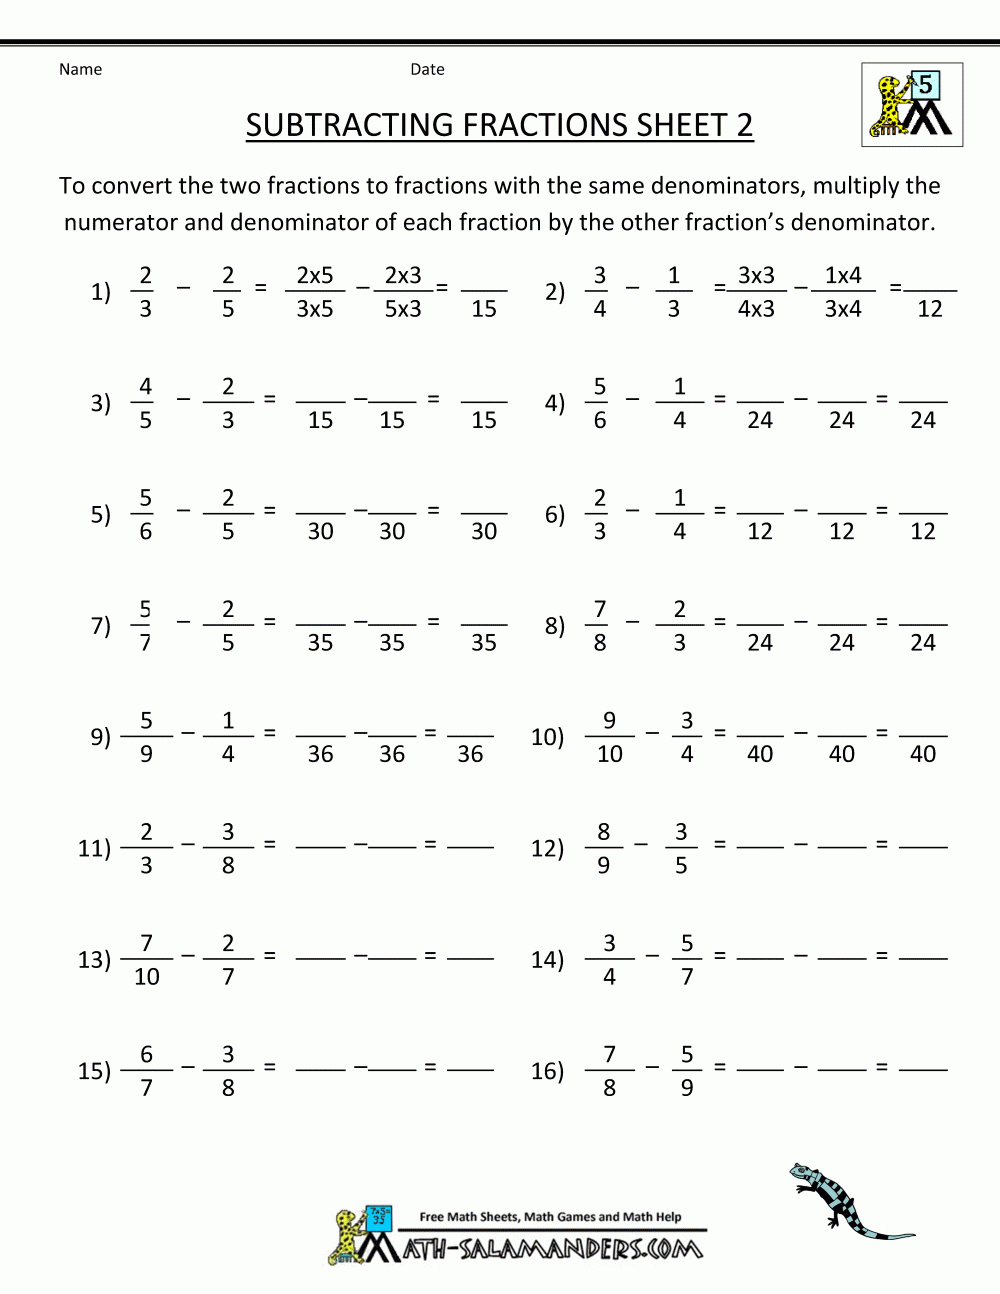 Free Printable Fraction Worksheets Subtracting Fractions 2 | Math - Free Printable Math Worksheets Addition And Subtraction